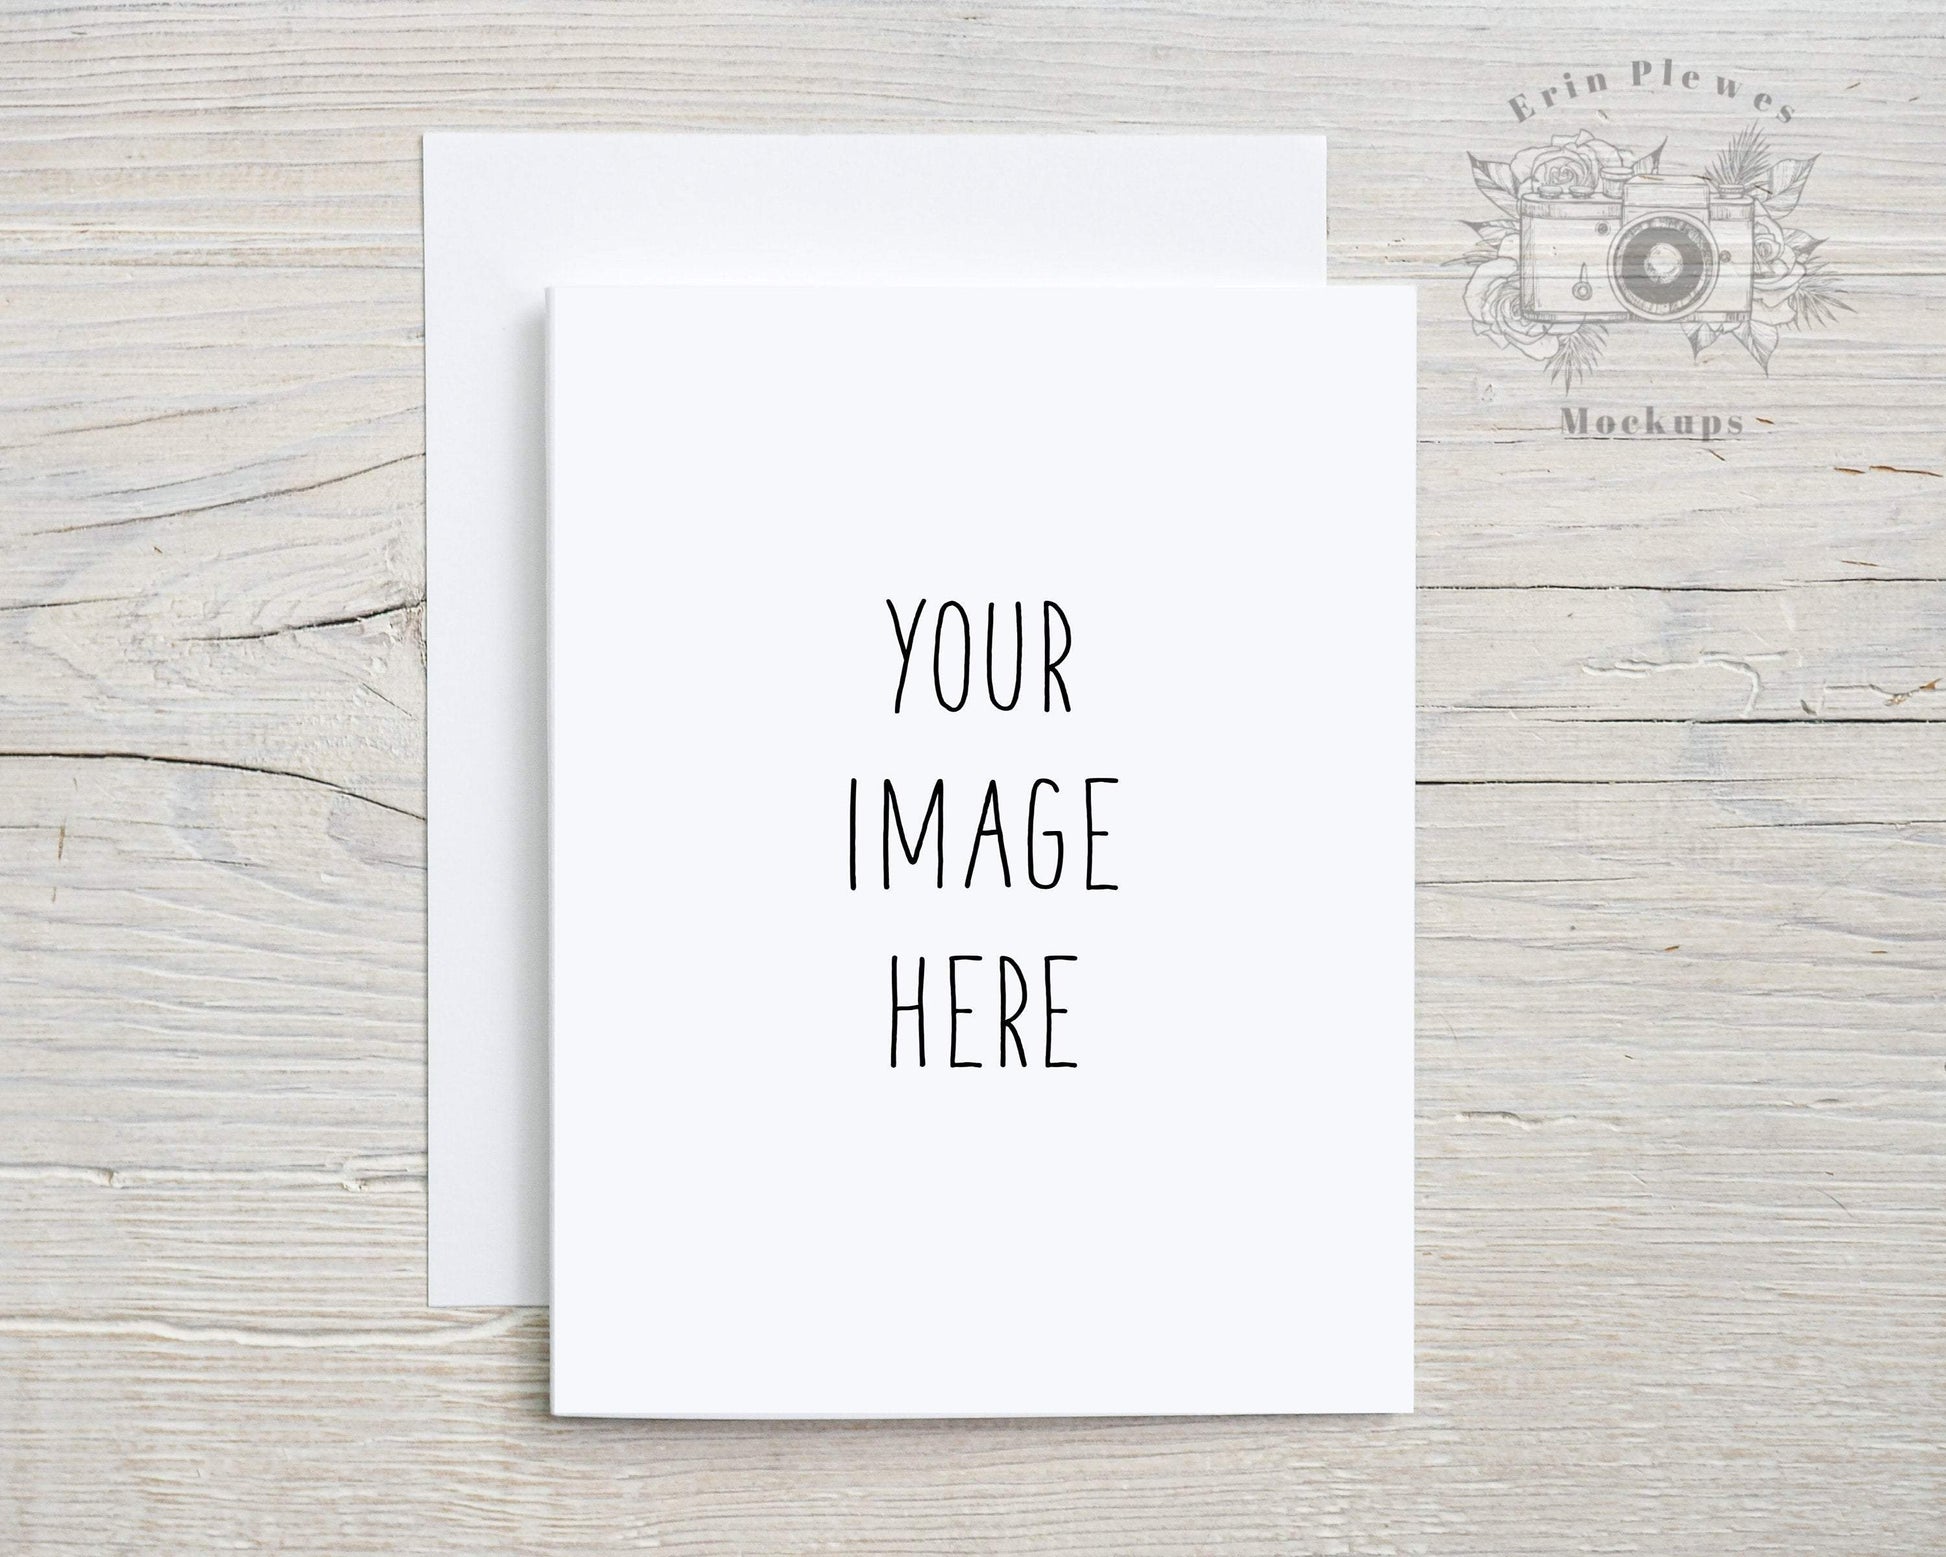 Erin Plewes Mockups A2 Greeting card mockup with white envelope, Thank you card mock-up for rustic wedding and lifestyle photo, Jpeg Instant Digital Download